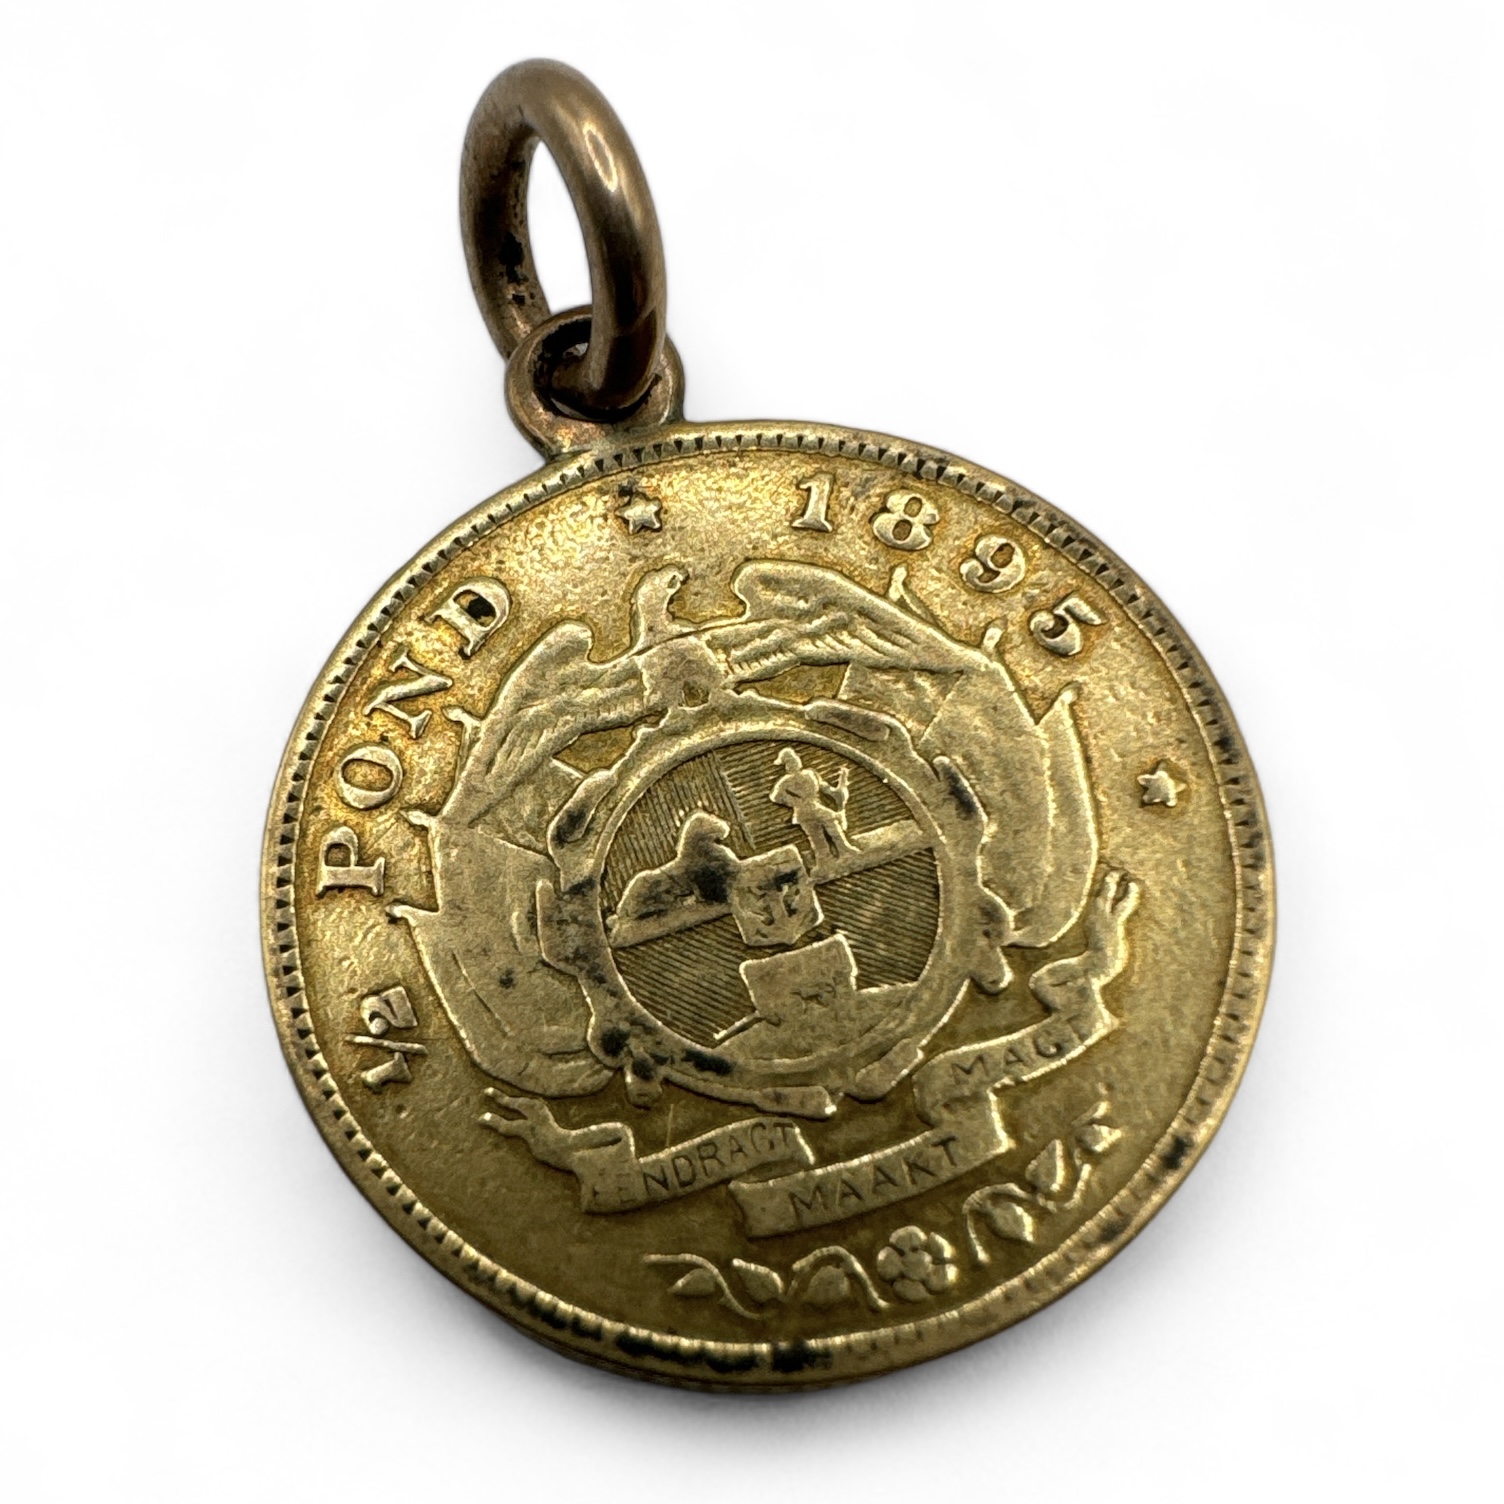 An 1895 gold 1/2 pond coin with a soldered ring mount. Gross weight approximately 4.28 grams.